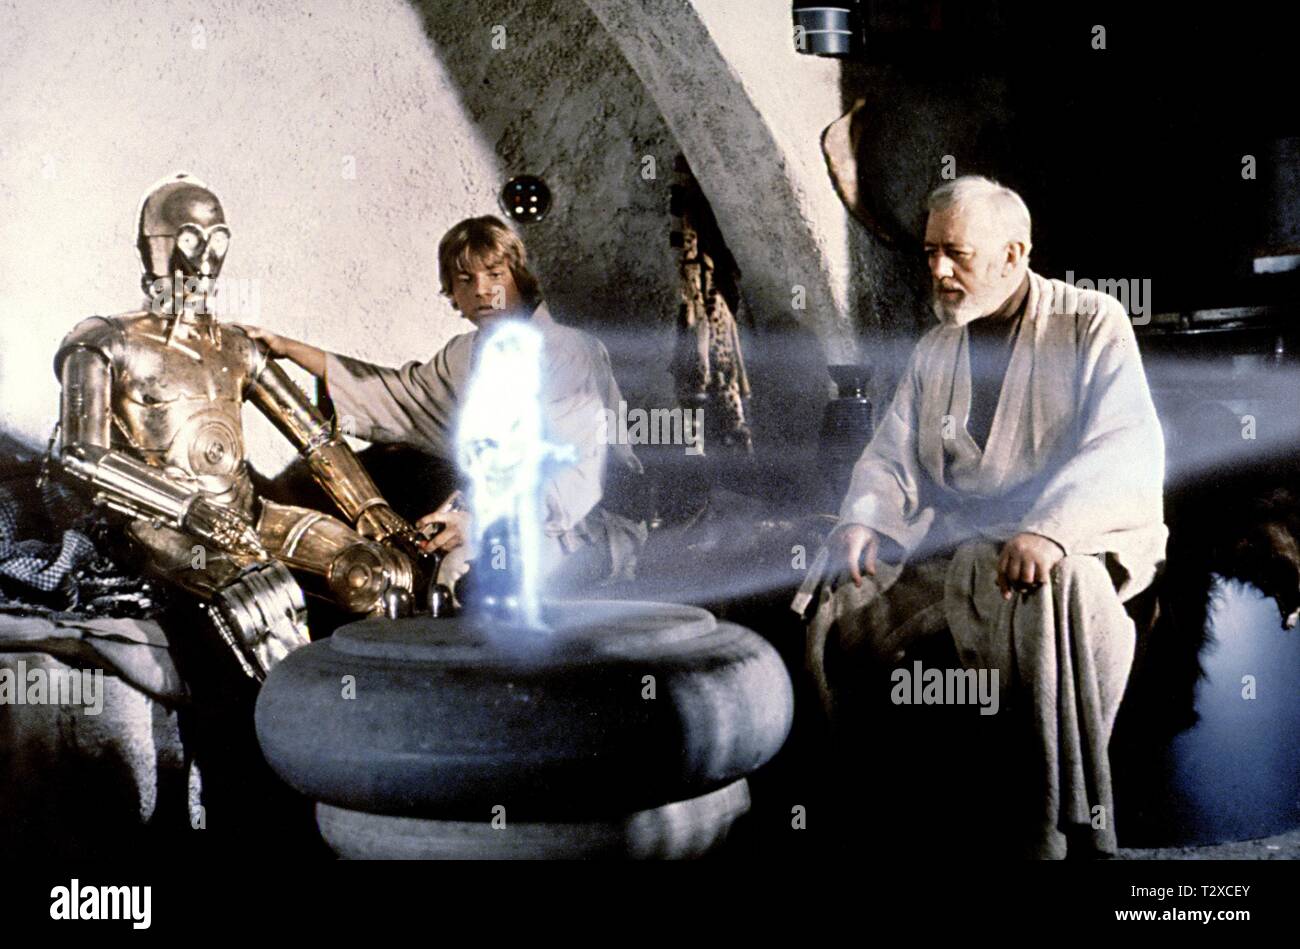 ANTHONY DANIELS, MARK HAMILL, ALEC GUINNESS, STAR WARS: EPISODE IV - A NEW HOPE, 1977 Stock Photo